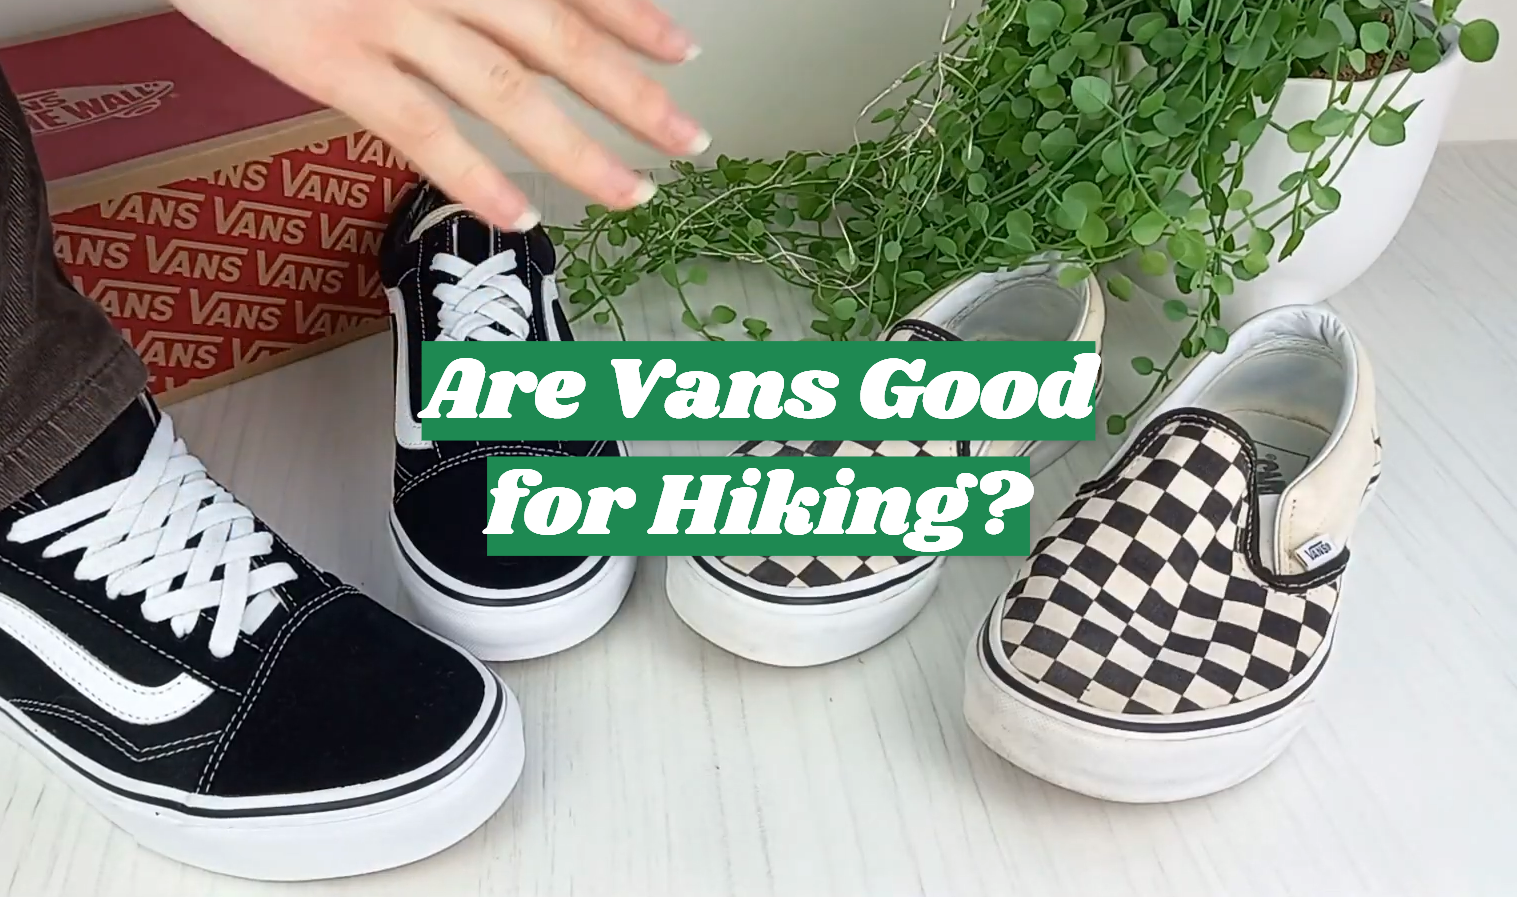 Are Vans Good for Hiking?